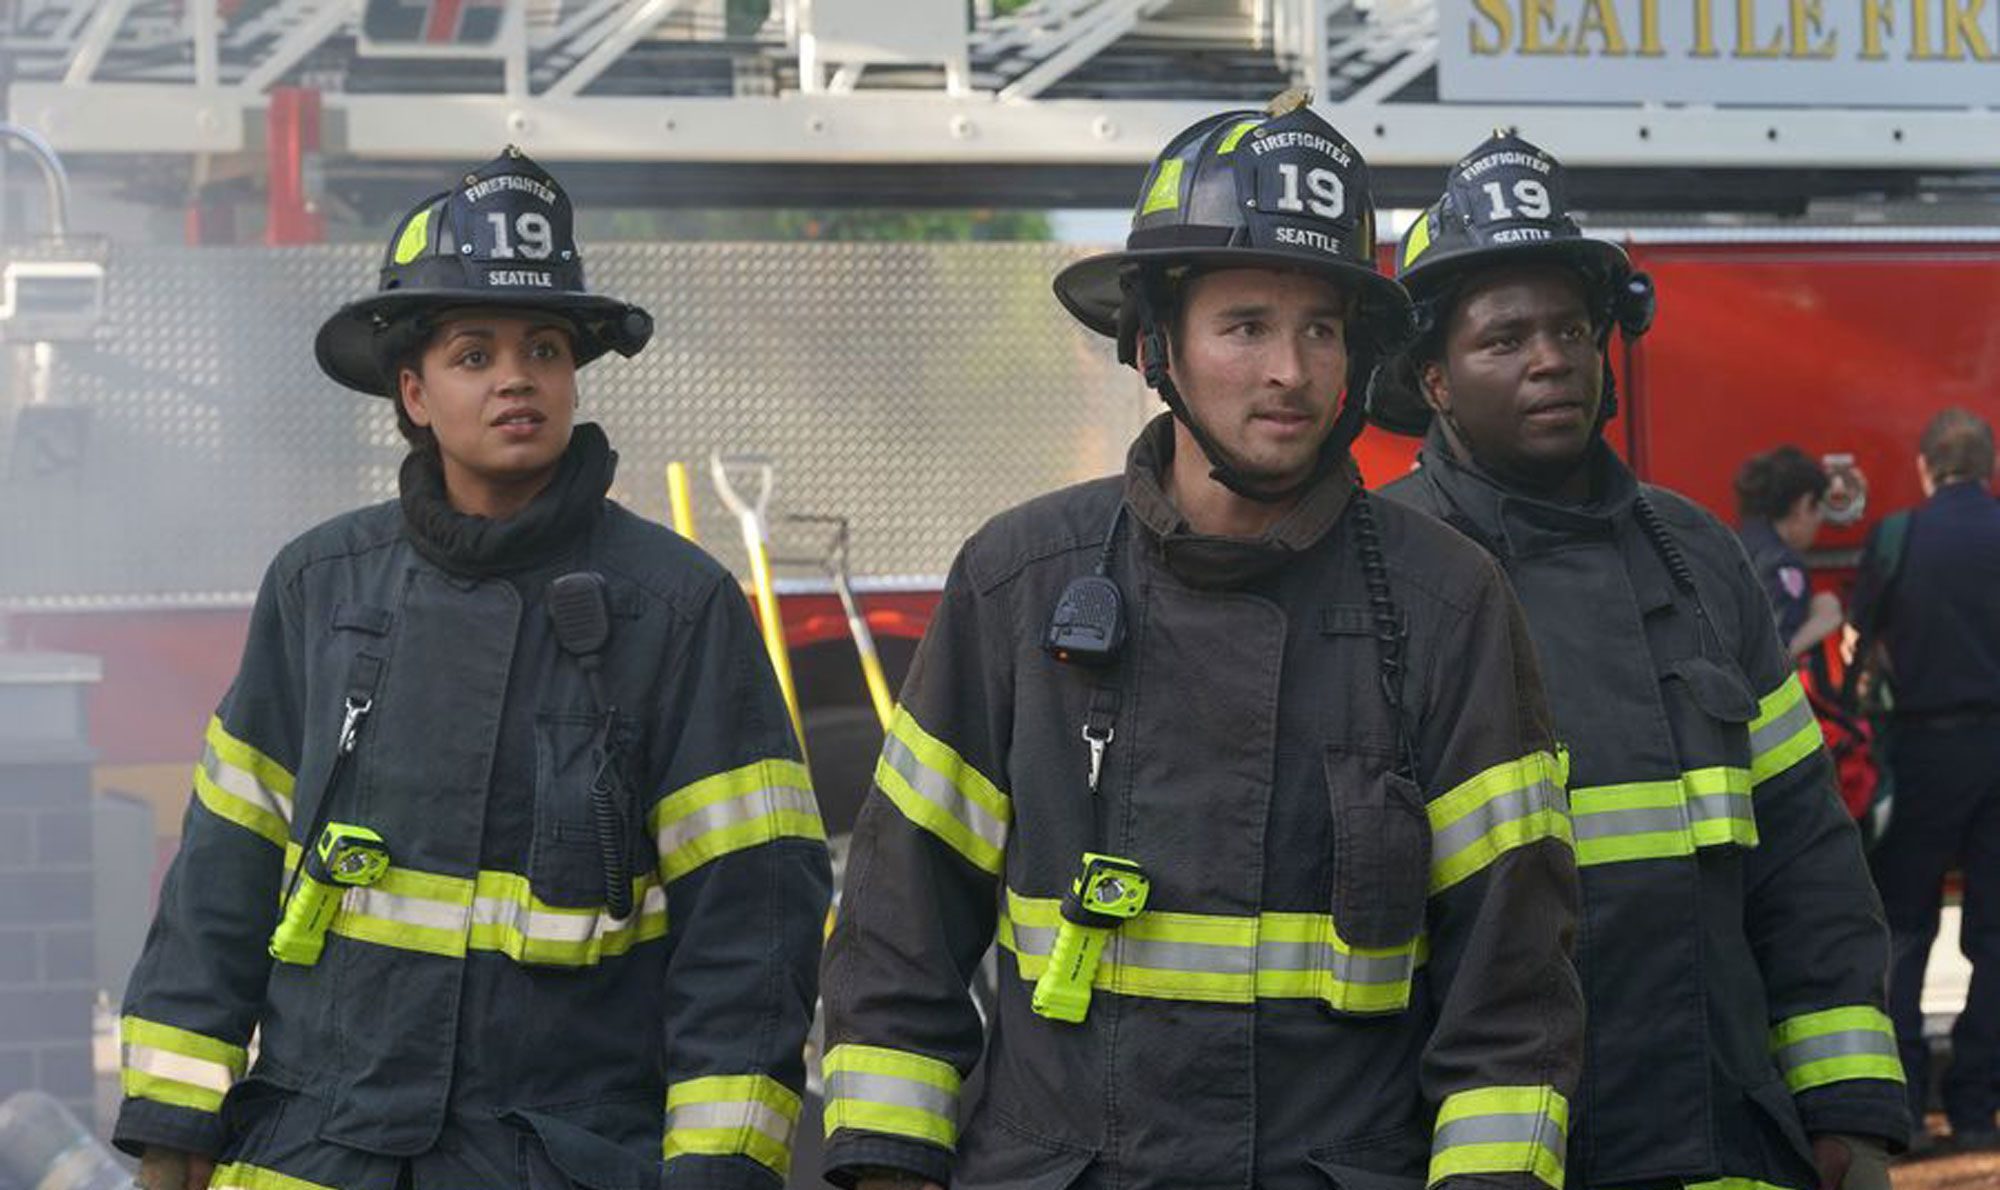 Is Station 19 on Netflix, Hulu, Prime? Where to Watch it Online?